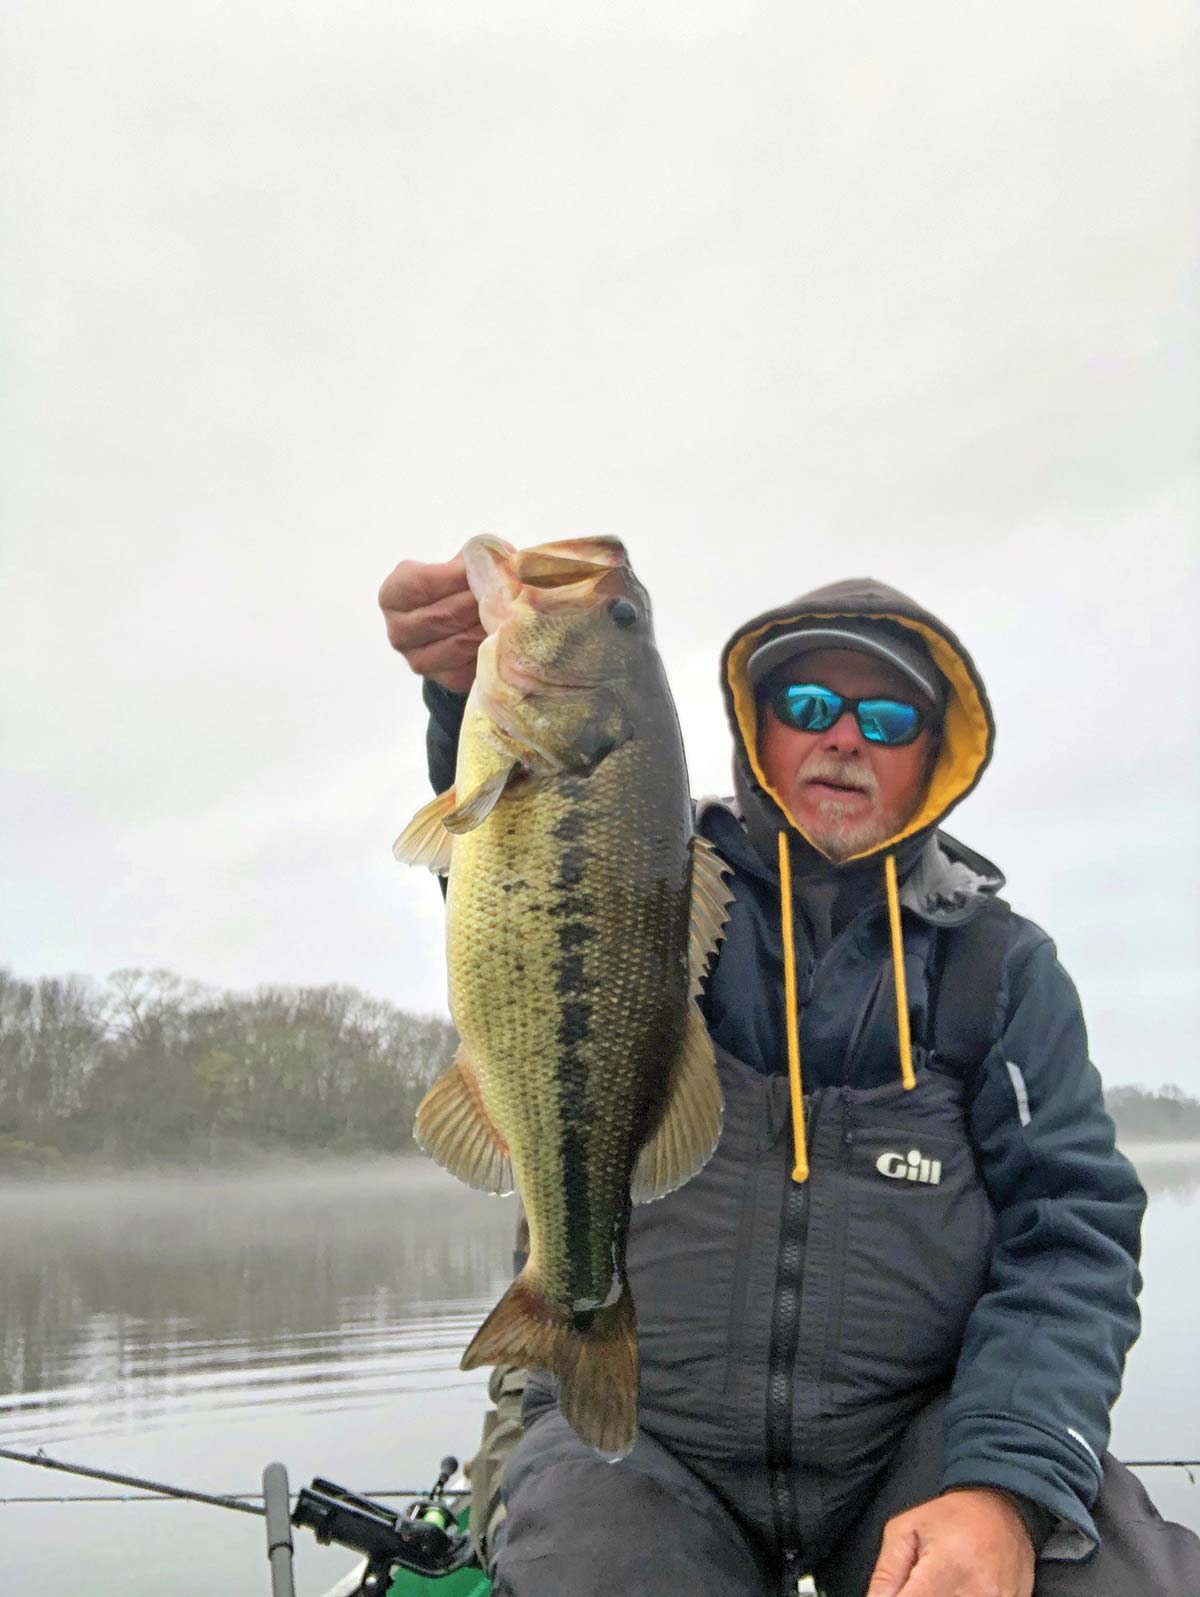 NED RIG FISHING In The Fall/Winter Months To Catch MORE BASS! 